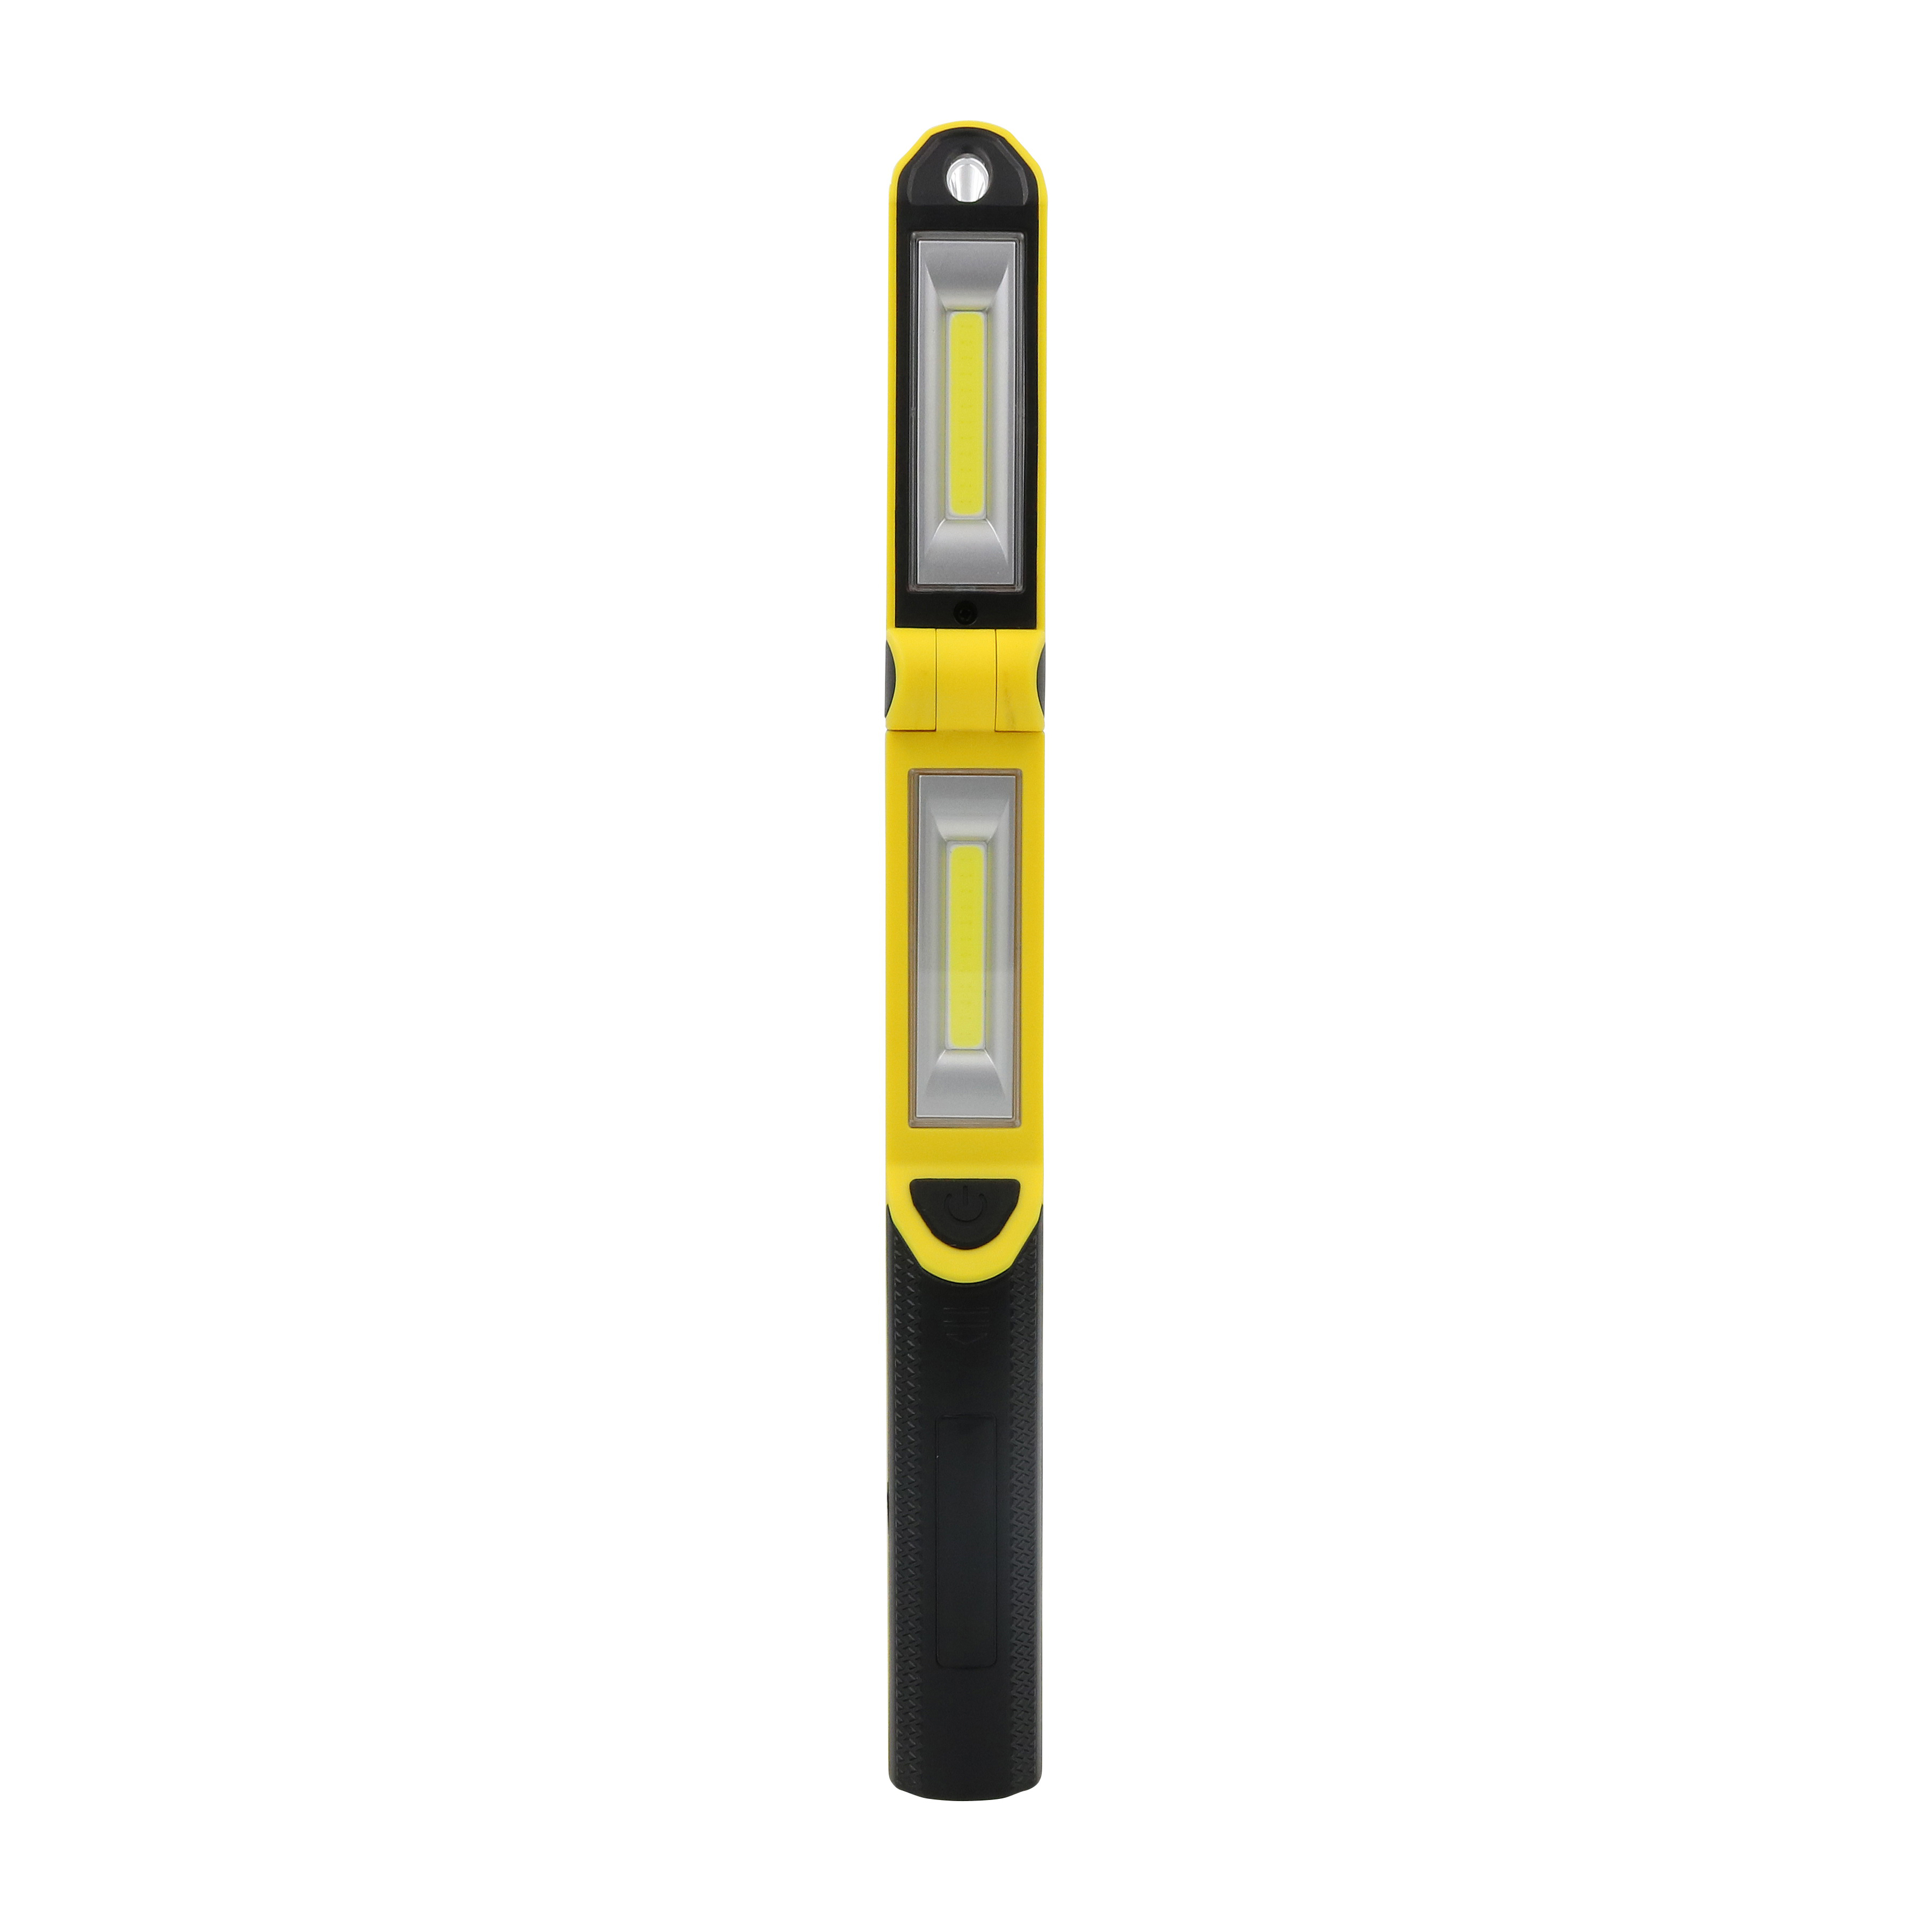 ORLEDFHH01 Work Light, AA Battery, LED Lamp, 40, 300 and 600 Lumens, Yellow and Black